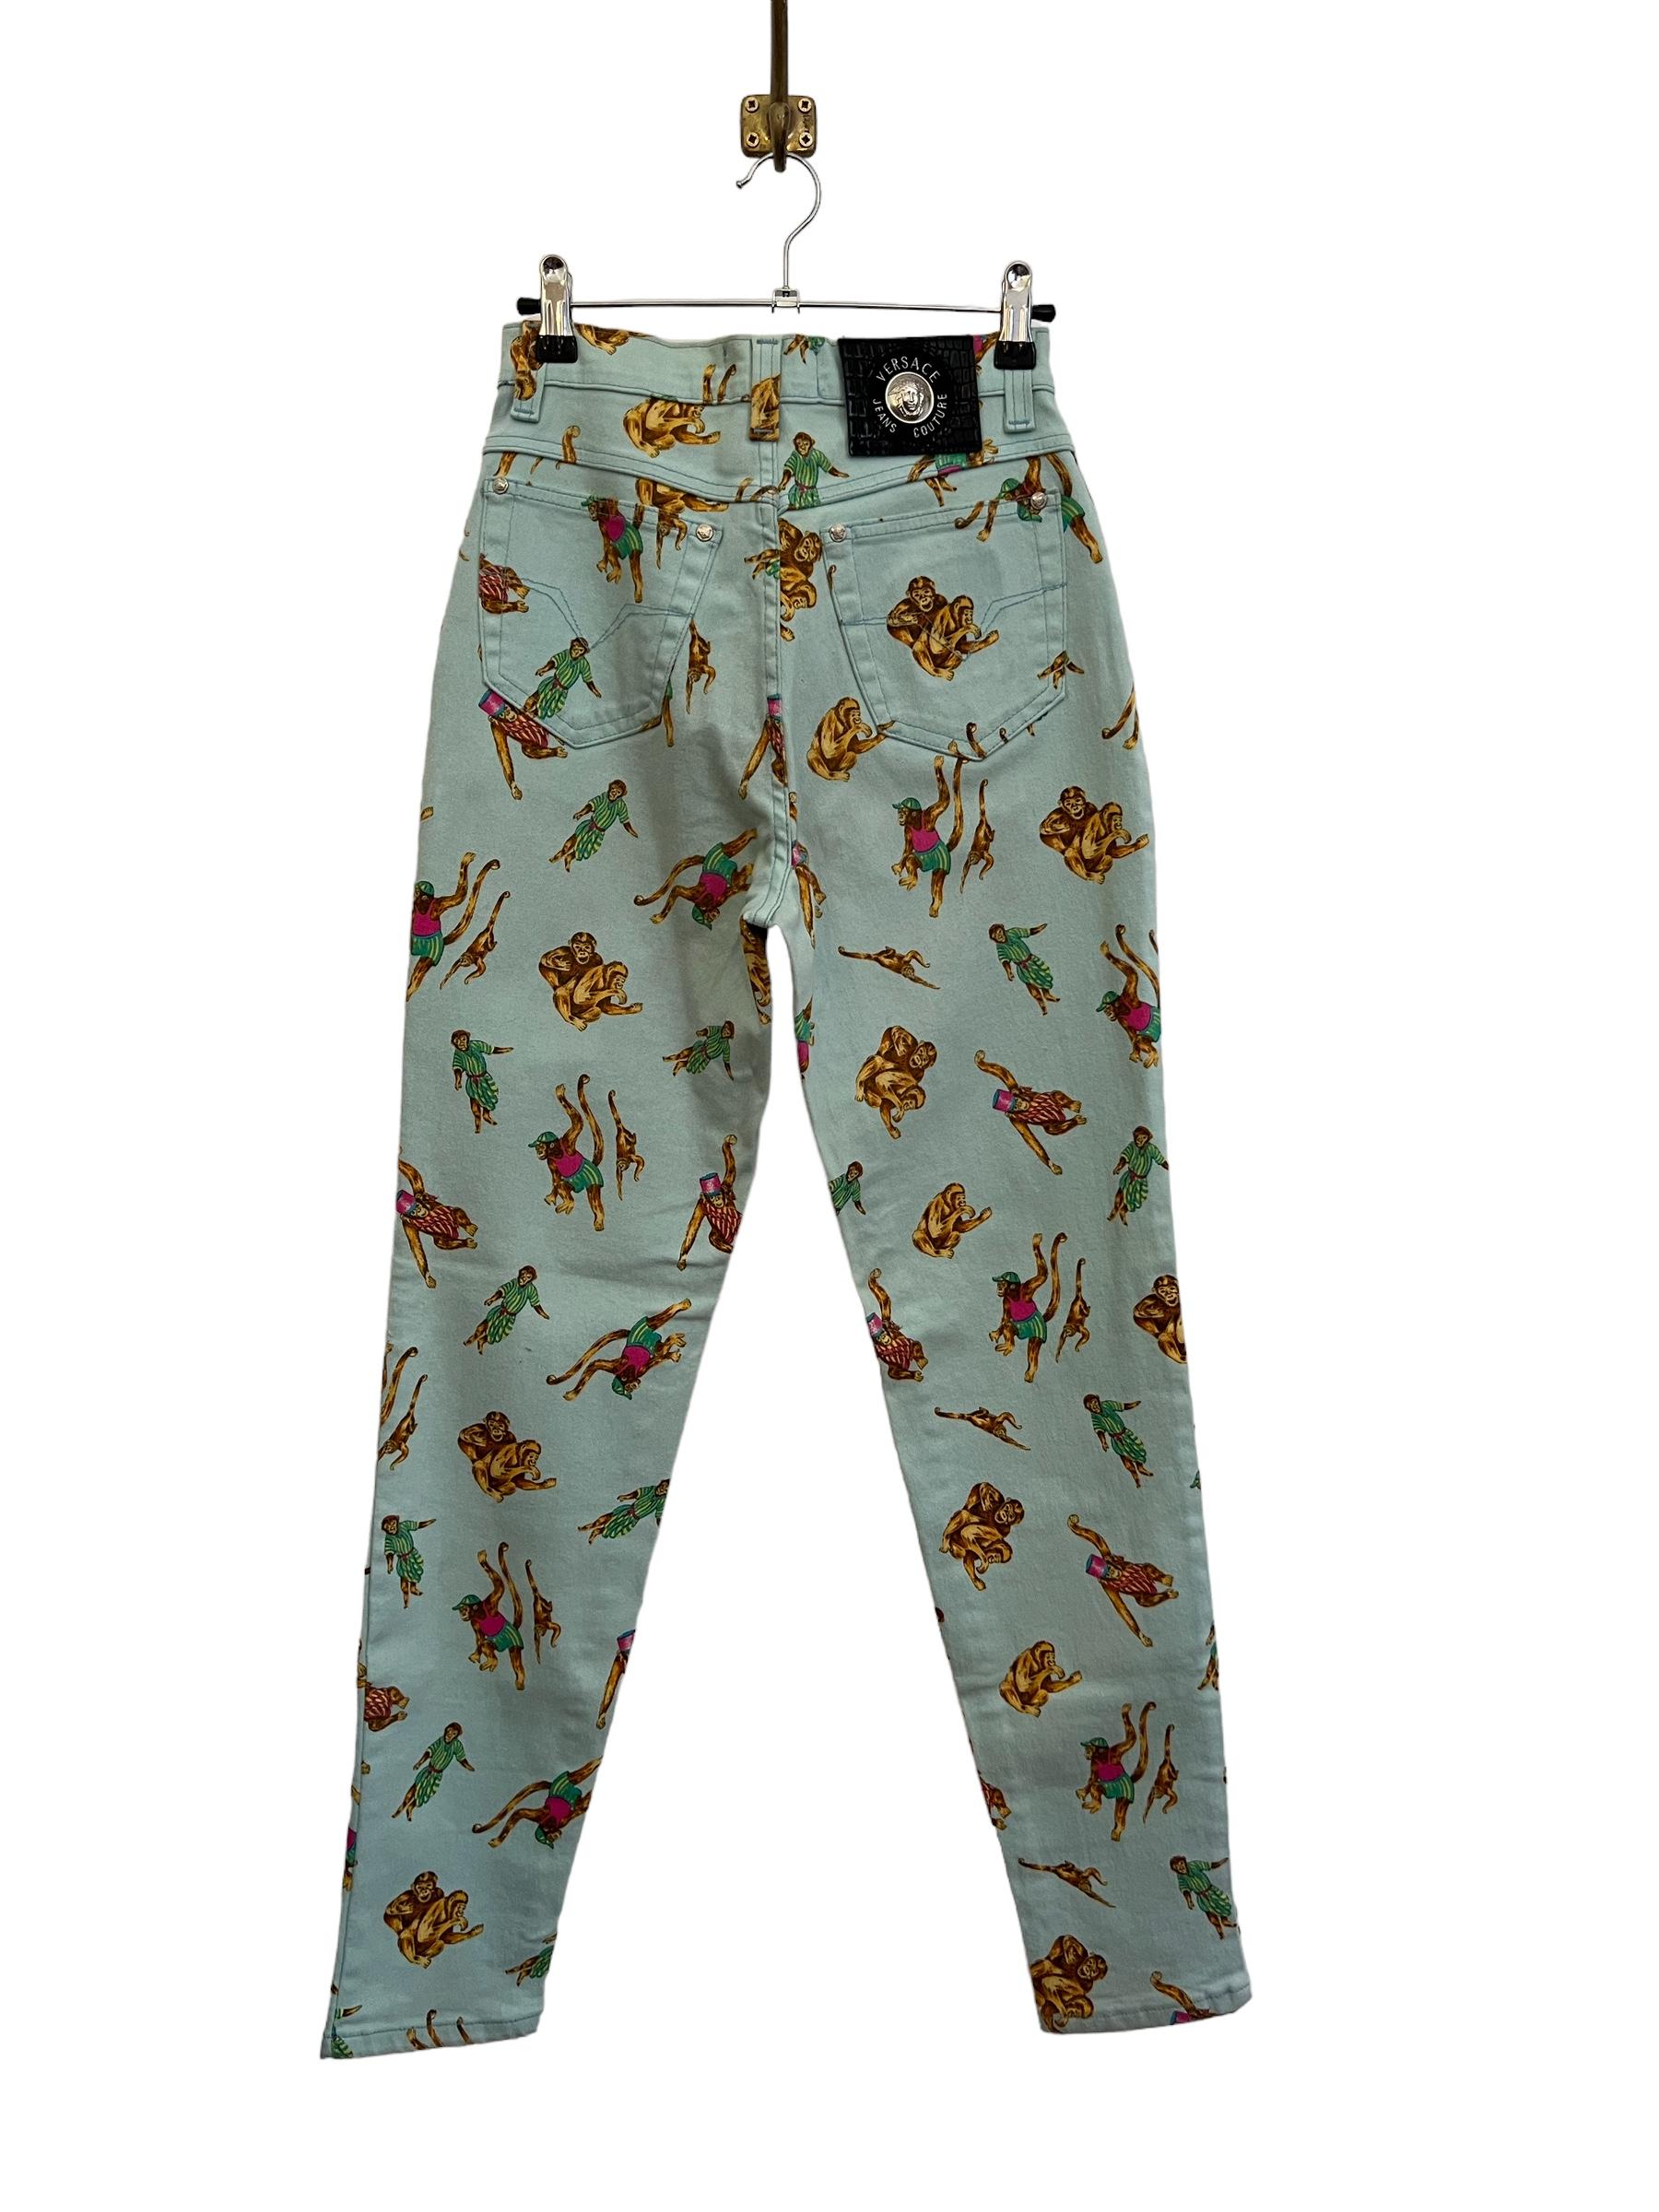 Fun 1990's Gianni Versace High waisted Colourful Monkey Cartoon pattern Jeans For Sale 5